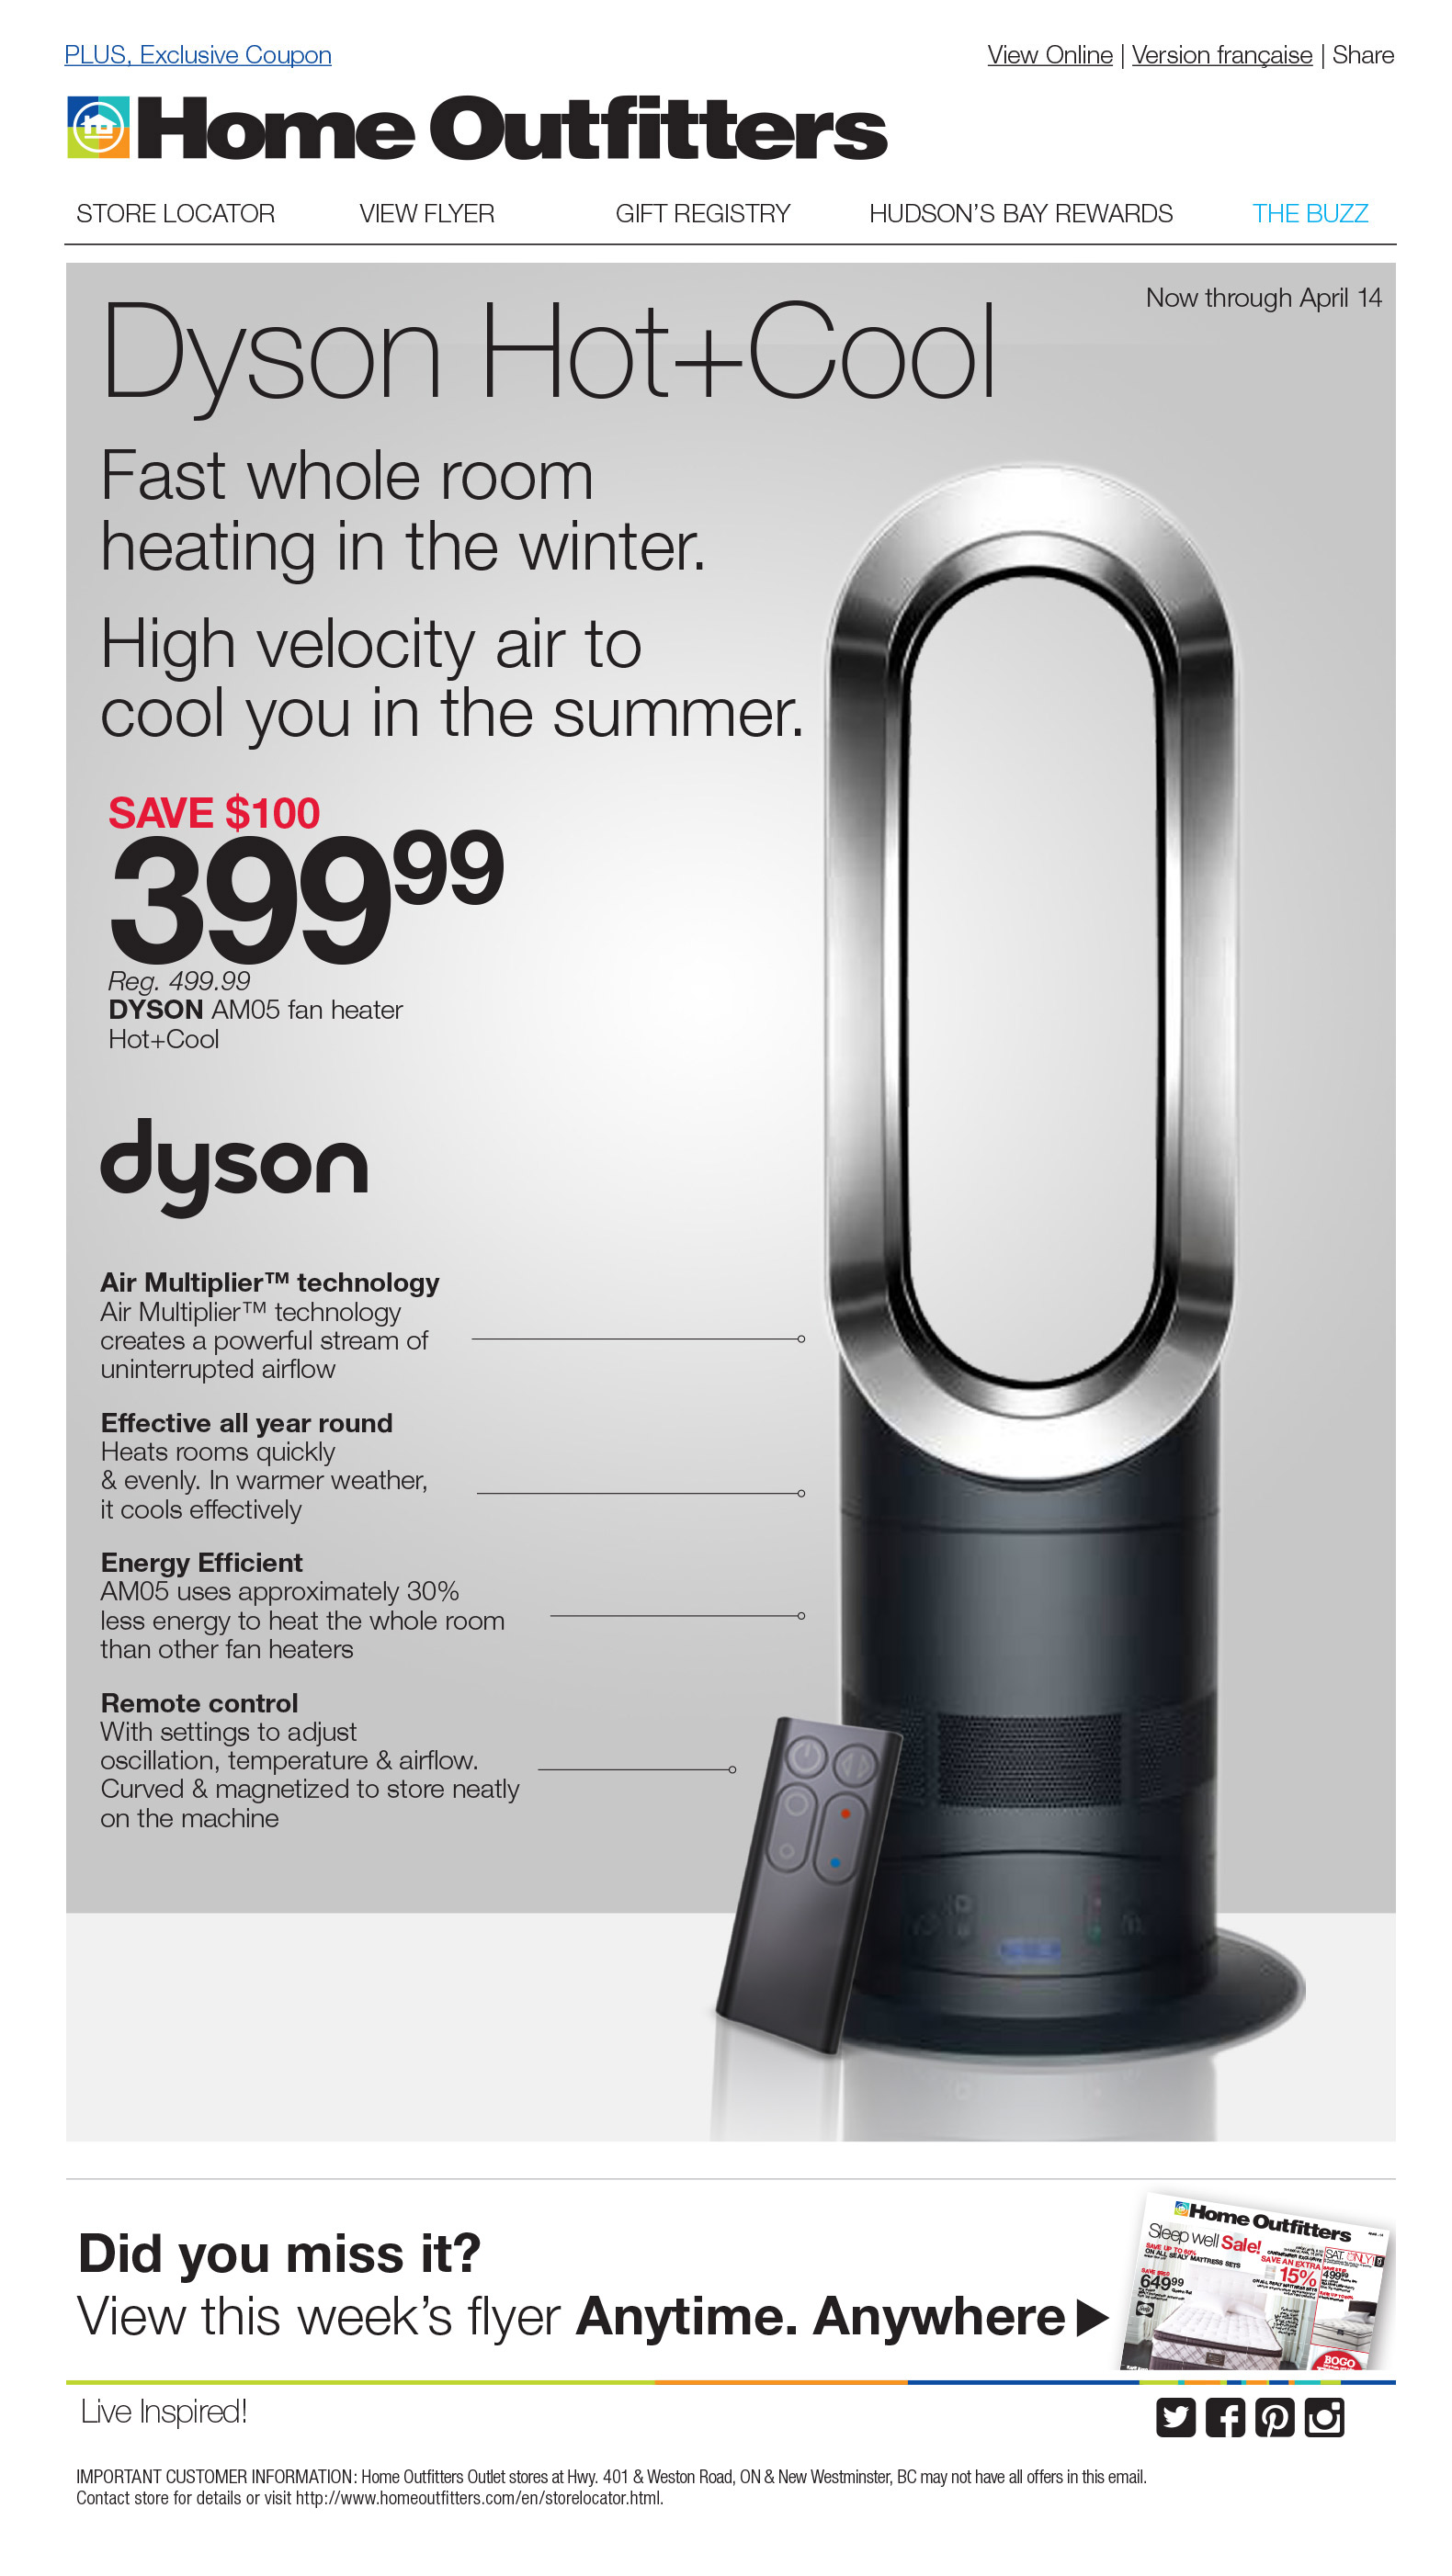 Home Outfitters Dyson Email Blast Campaign Design